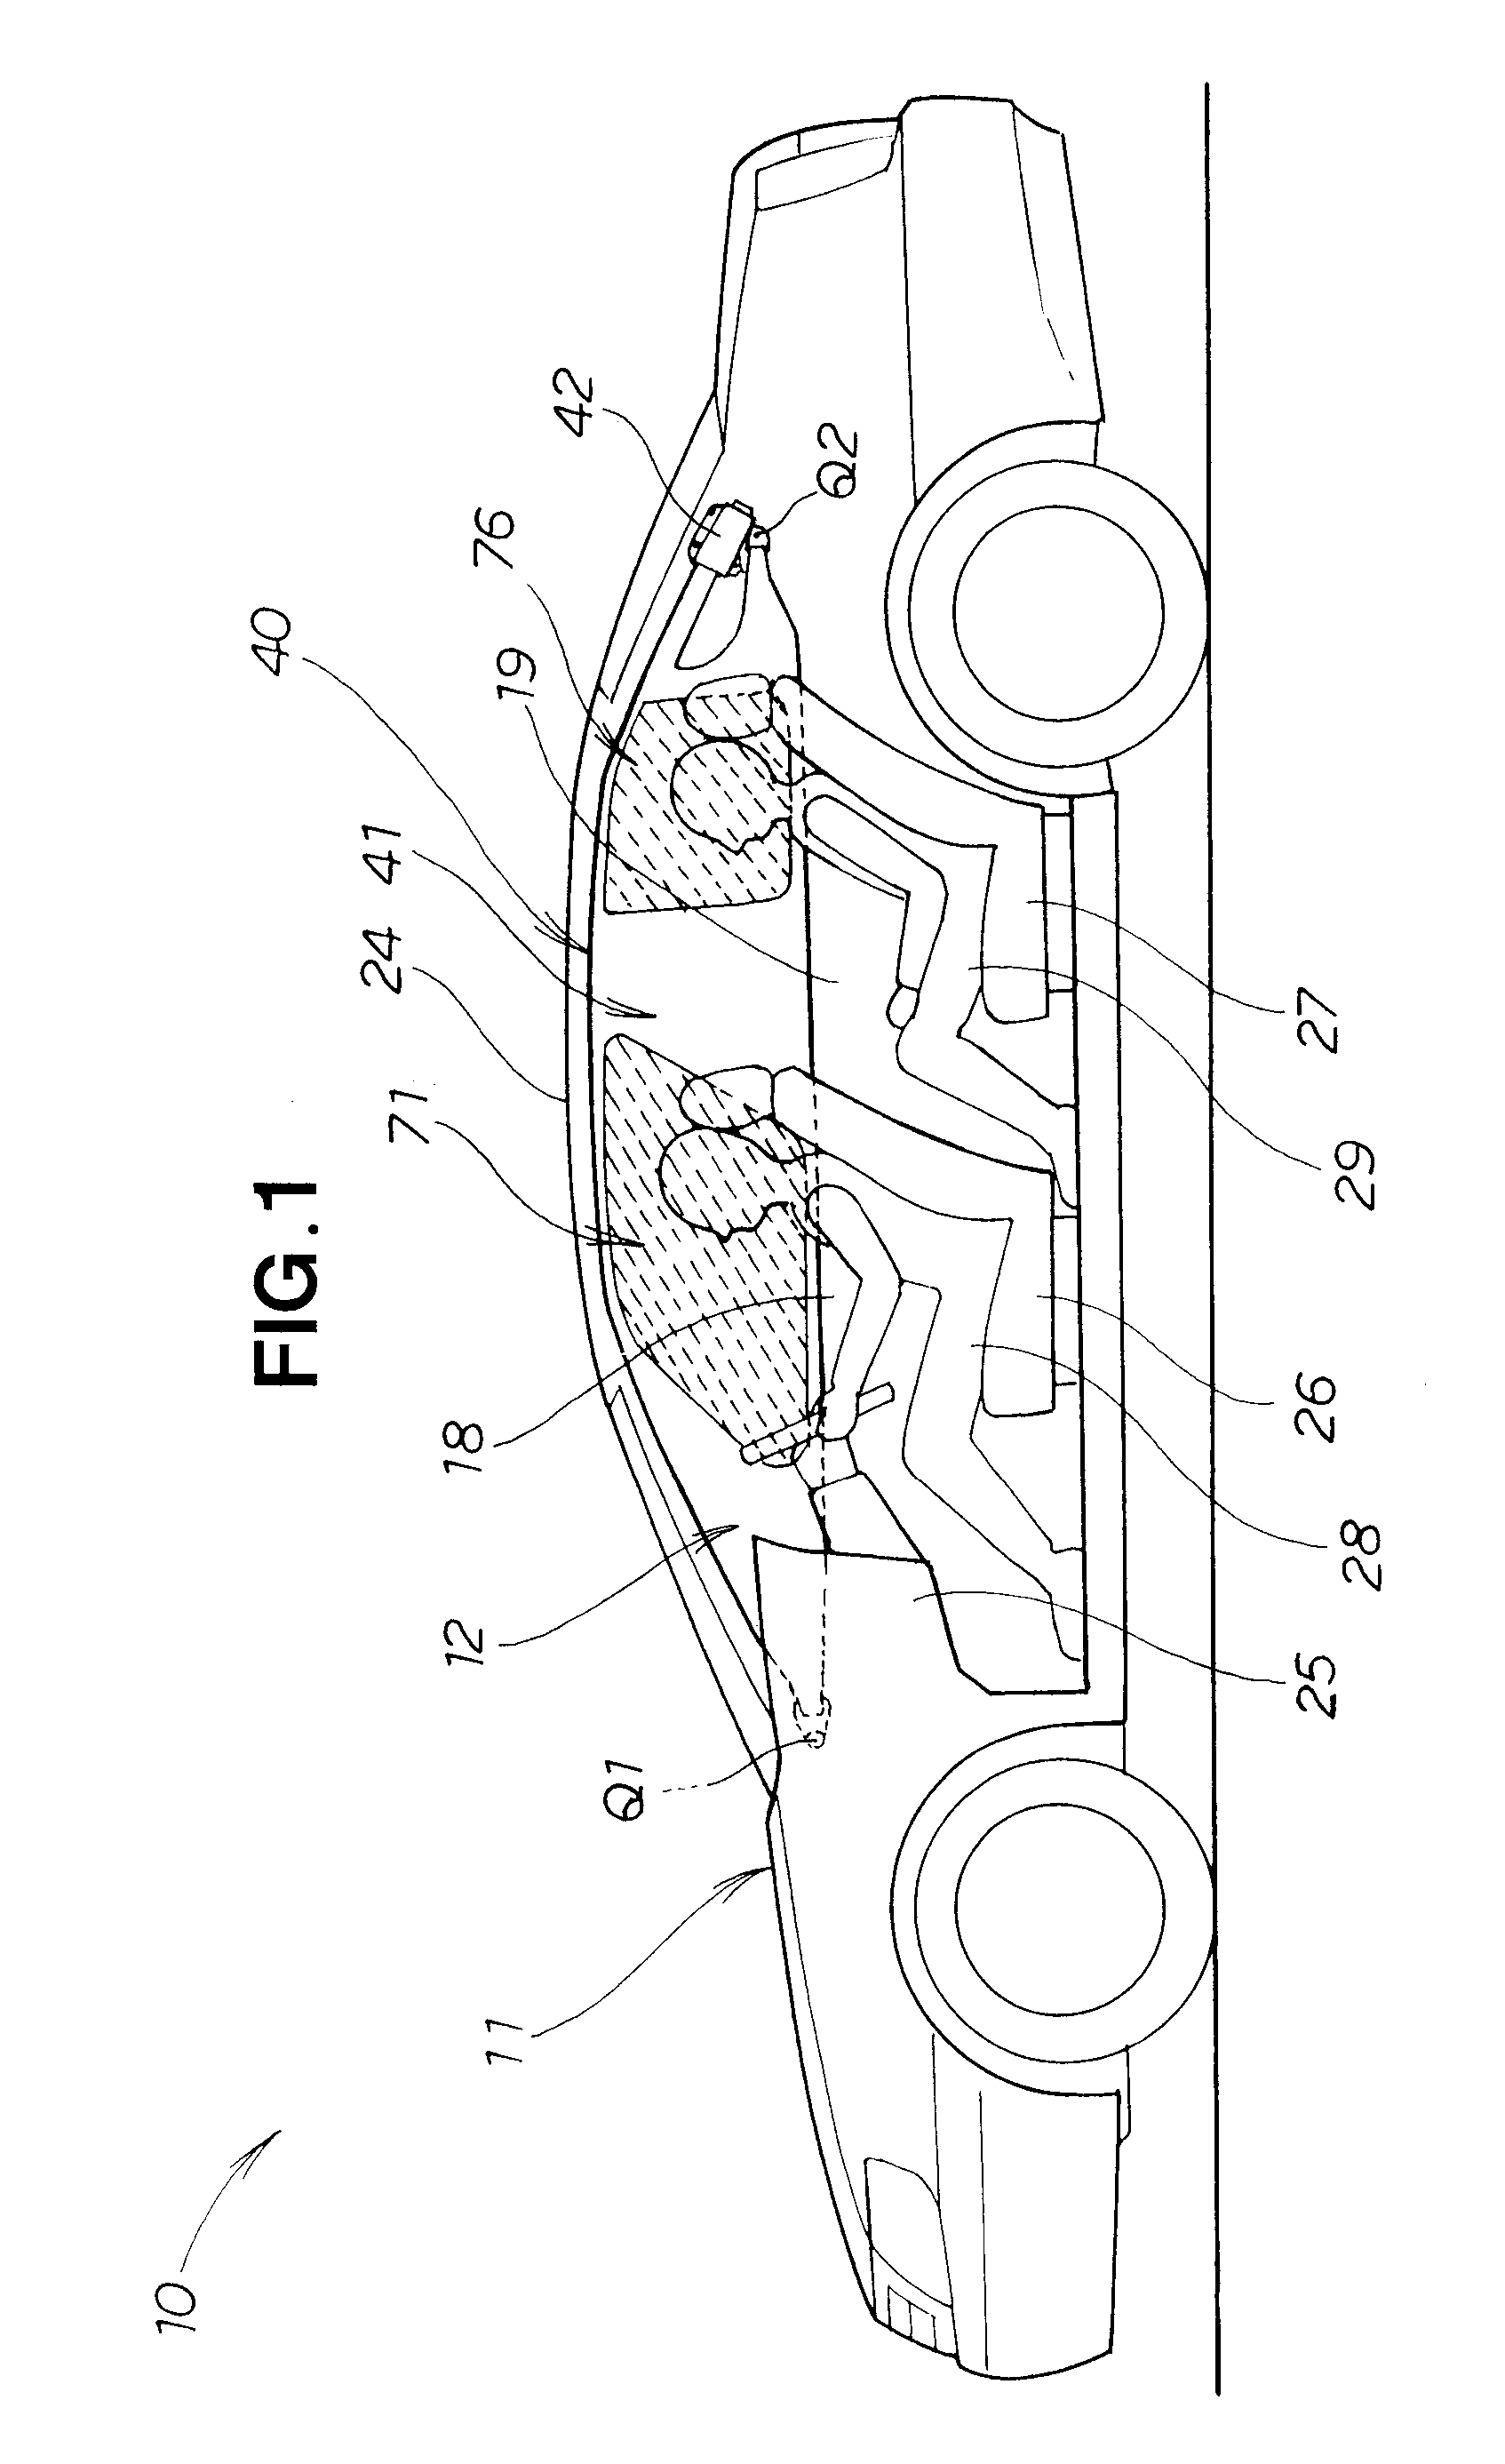 Vehicle occupant protection apparatus